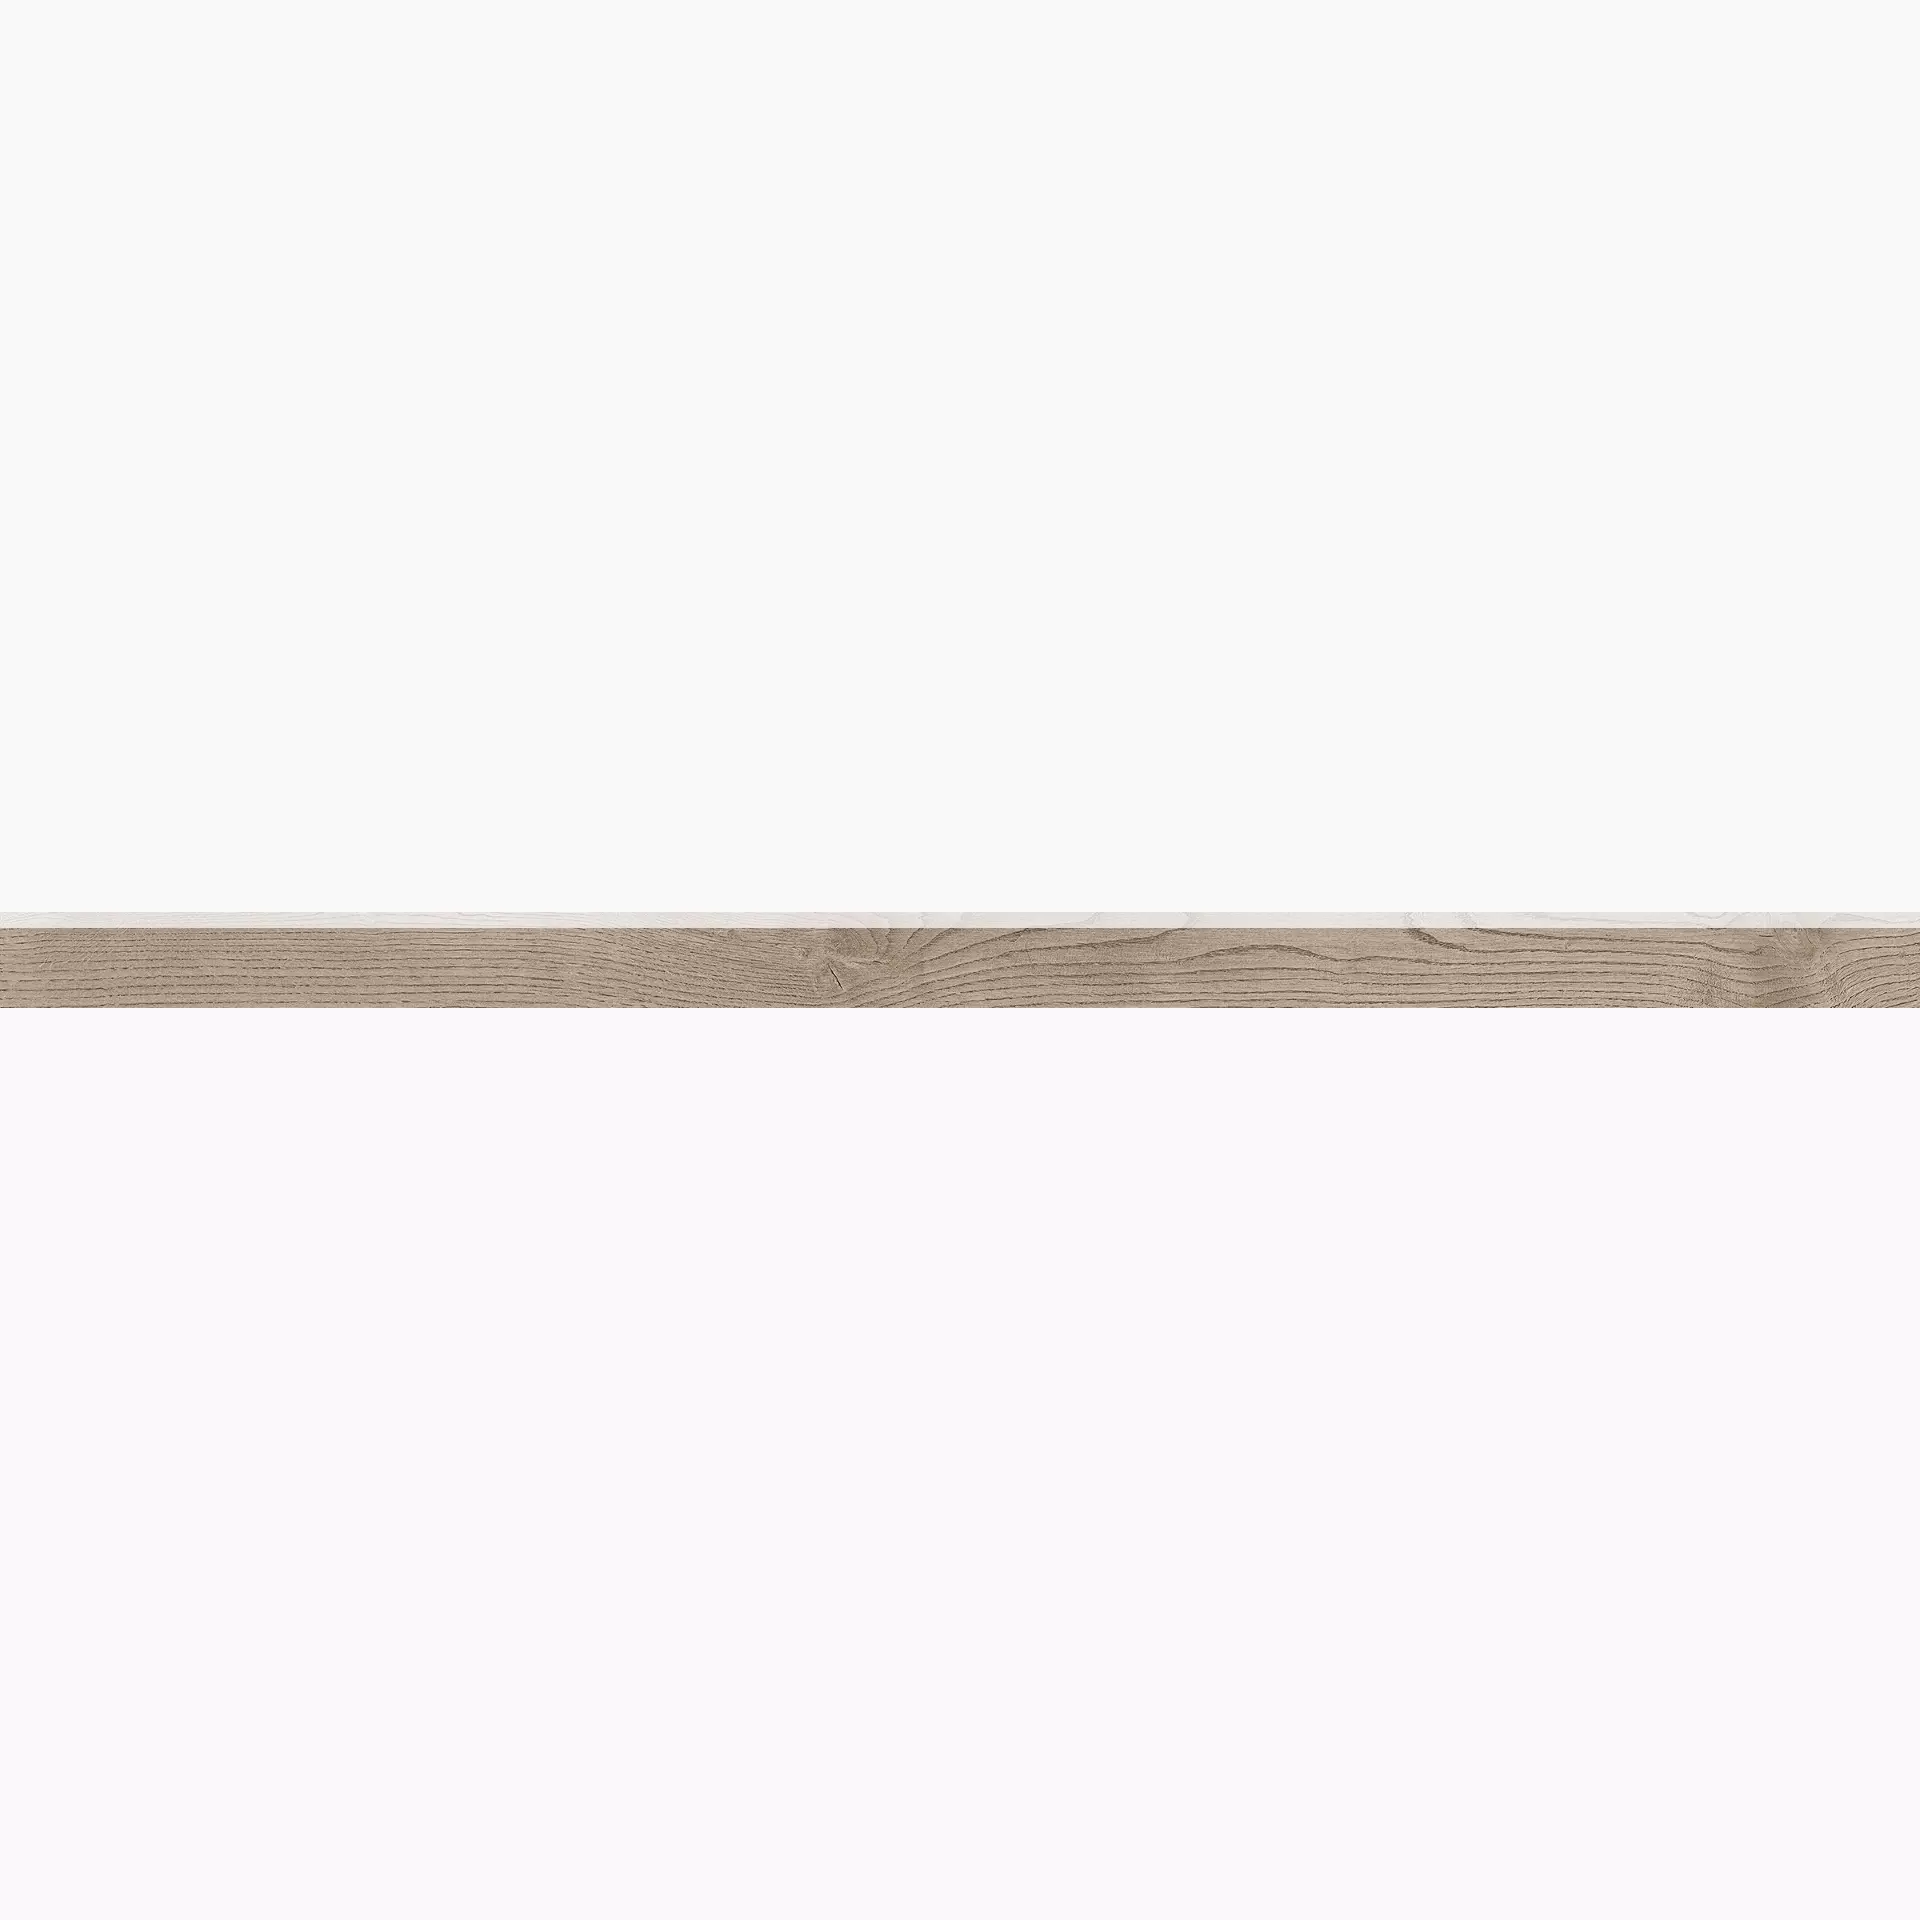 Gardenia Orchidea Just Code Sand Naturale Skirting board GML75020 6x120cm rectified 8,5mm